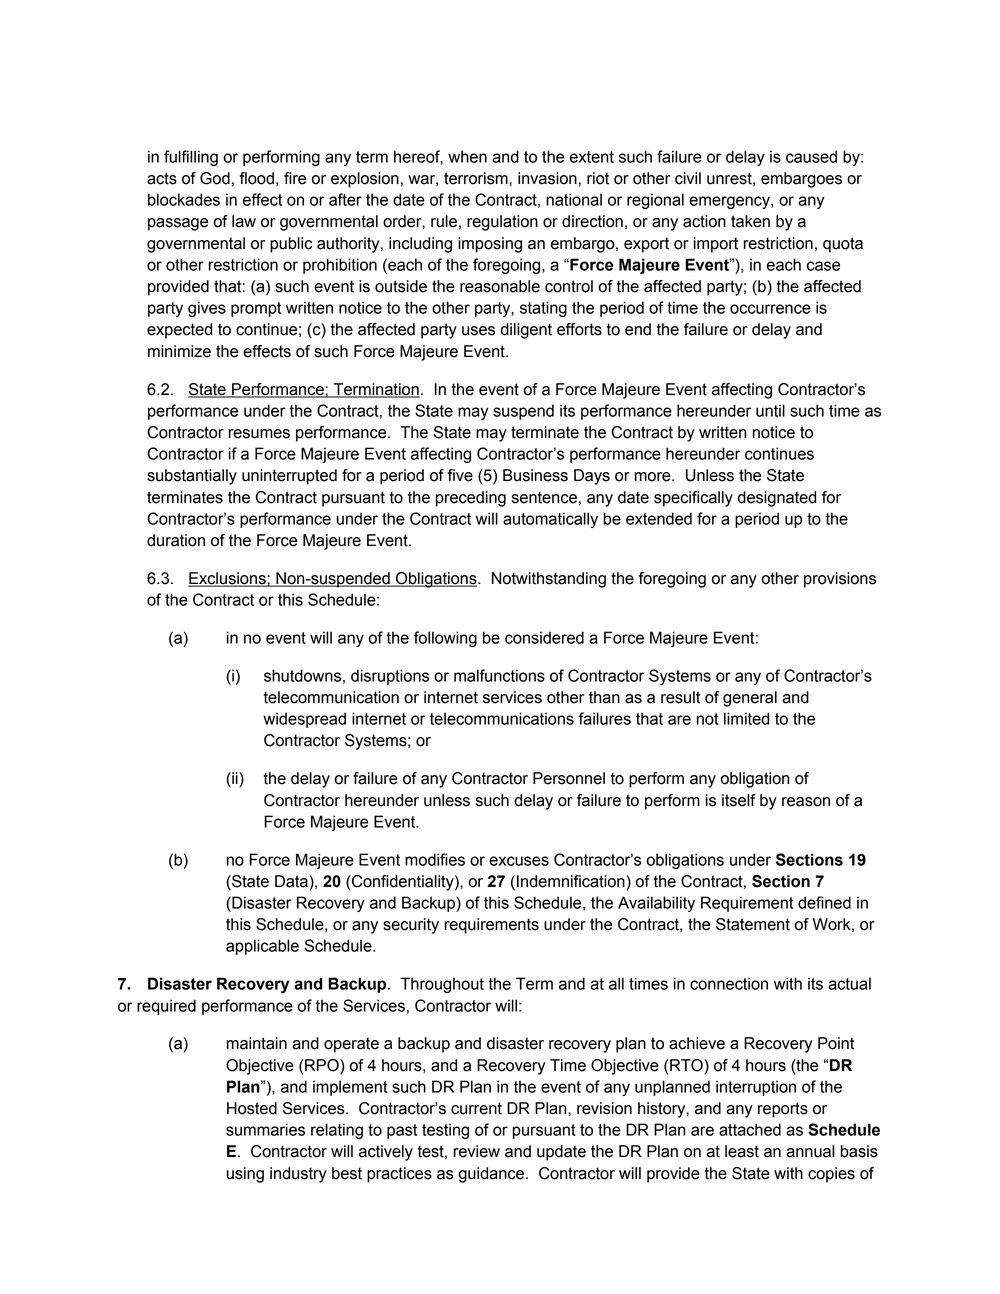 Page 68 from State of Michigan 2020 Kaseware contract